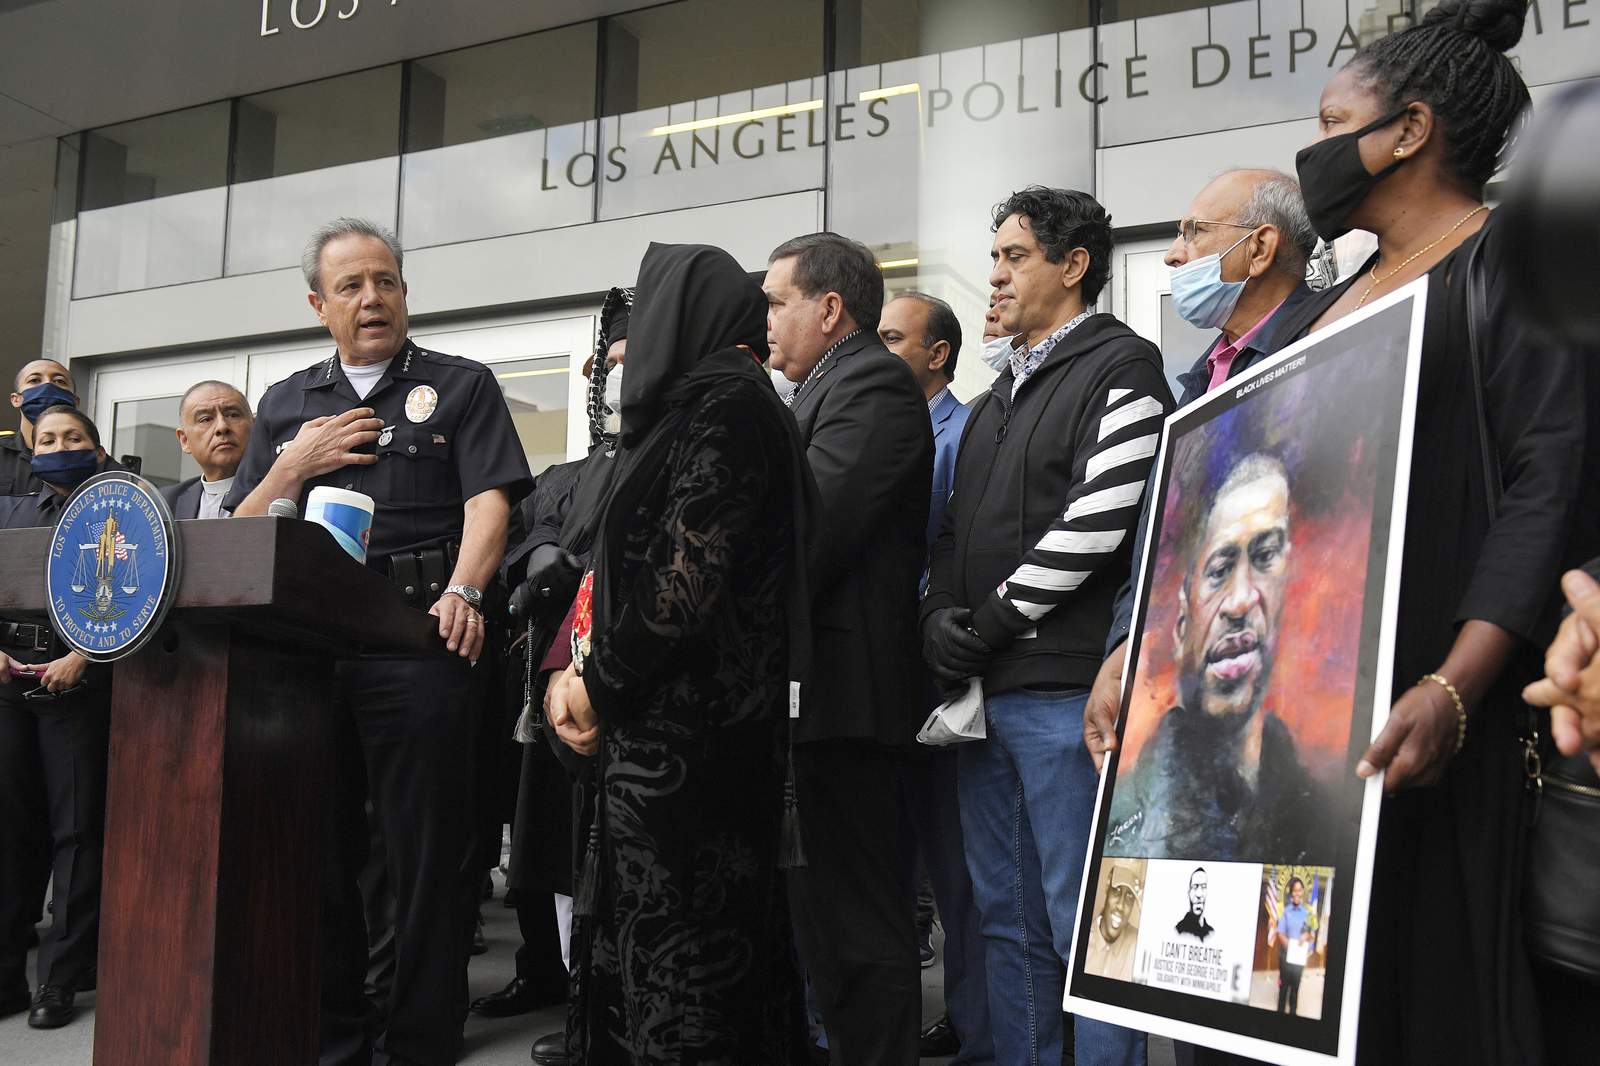 LAPD, police union outraged by report of Floyd 'Valentine'